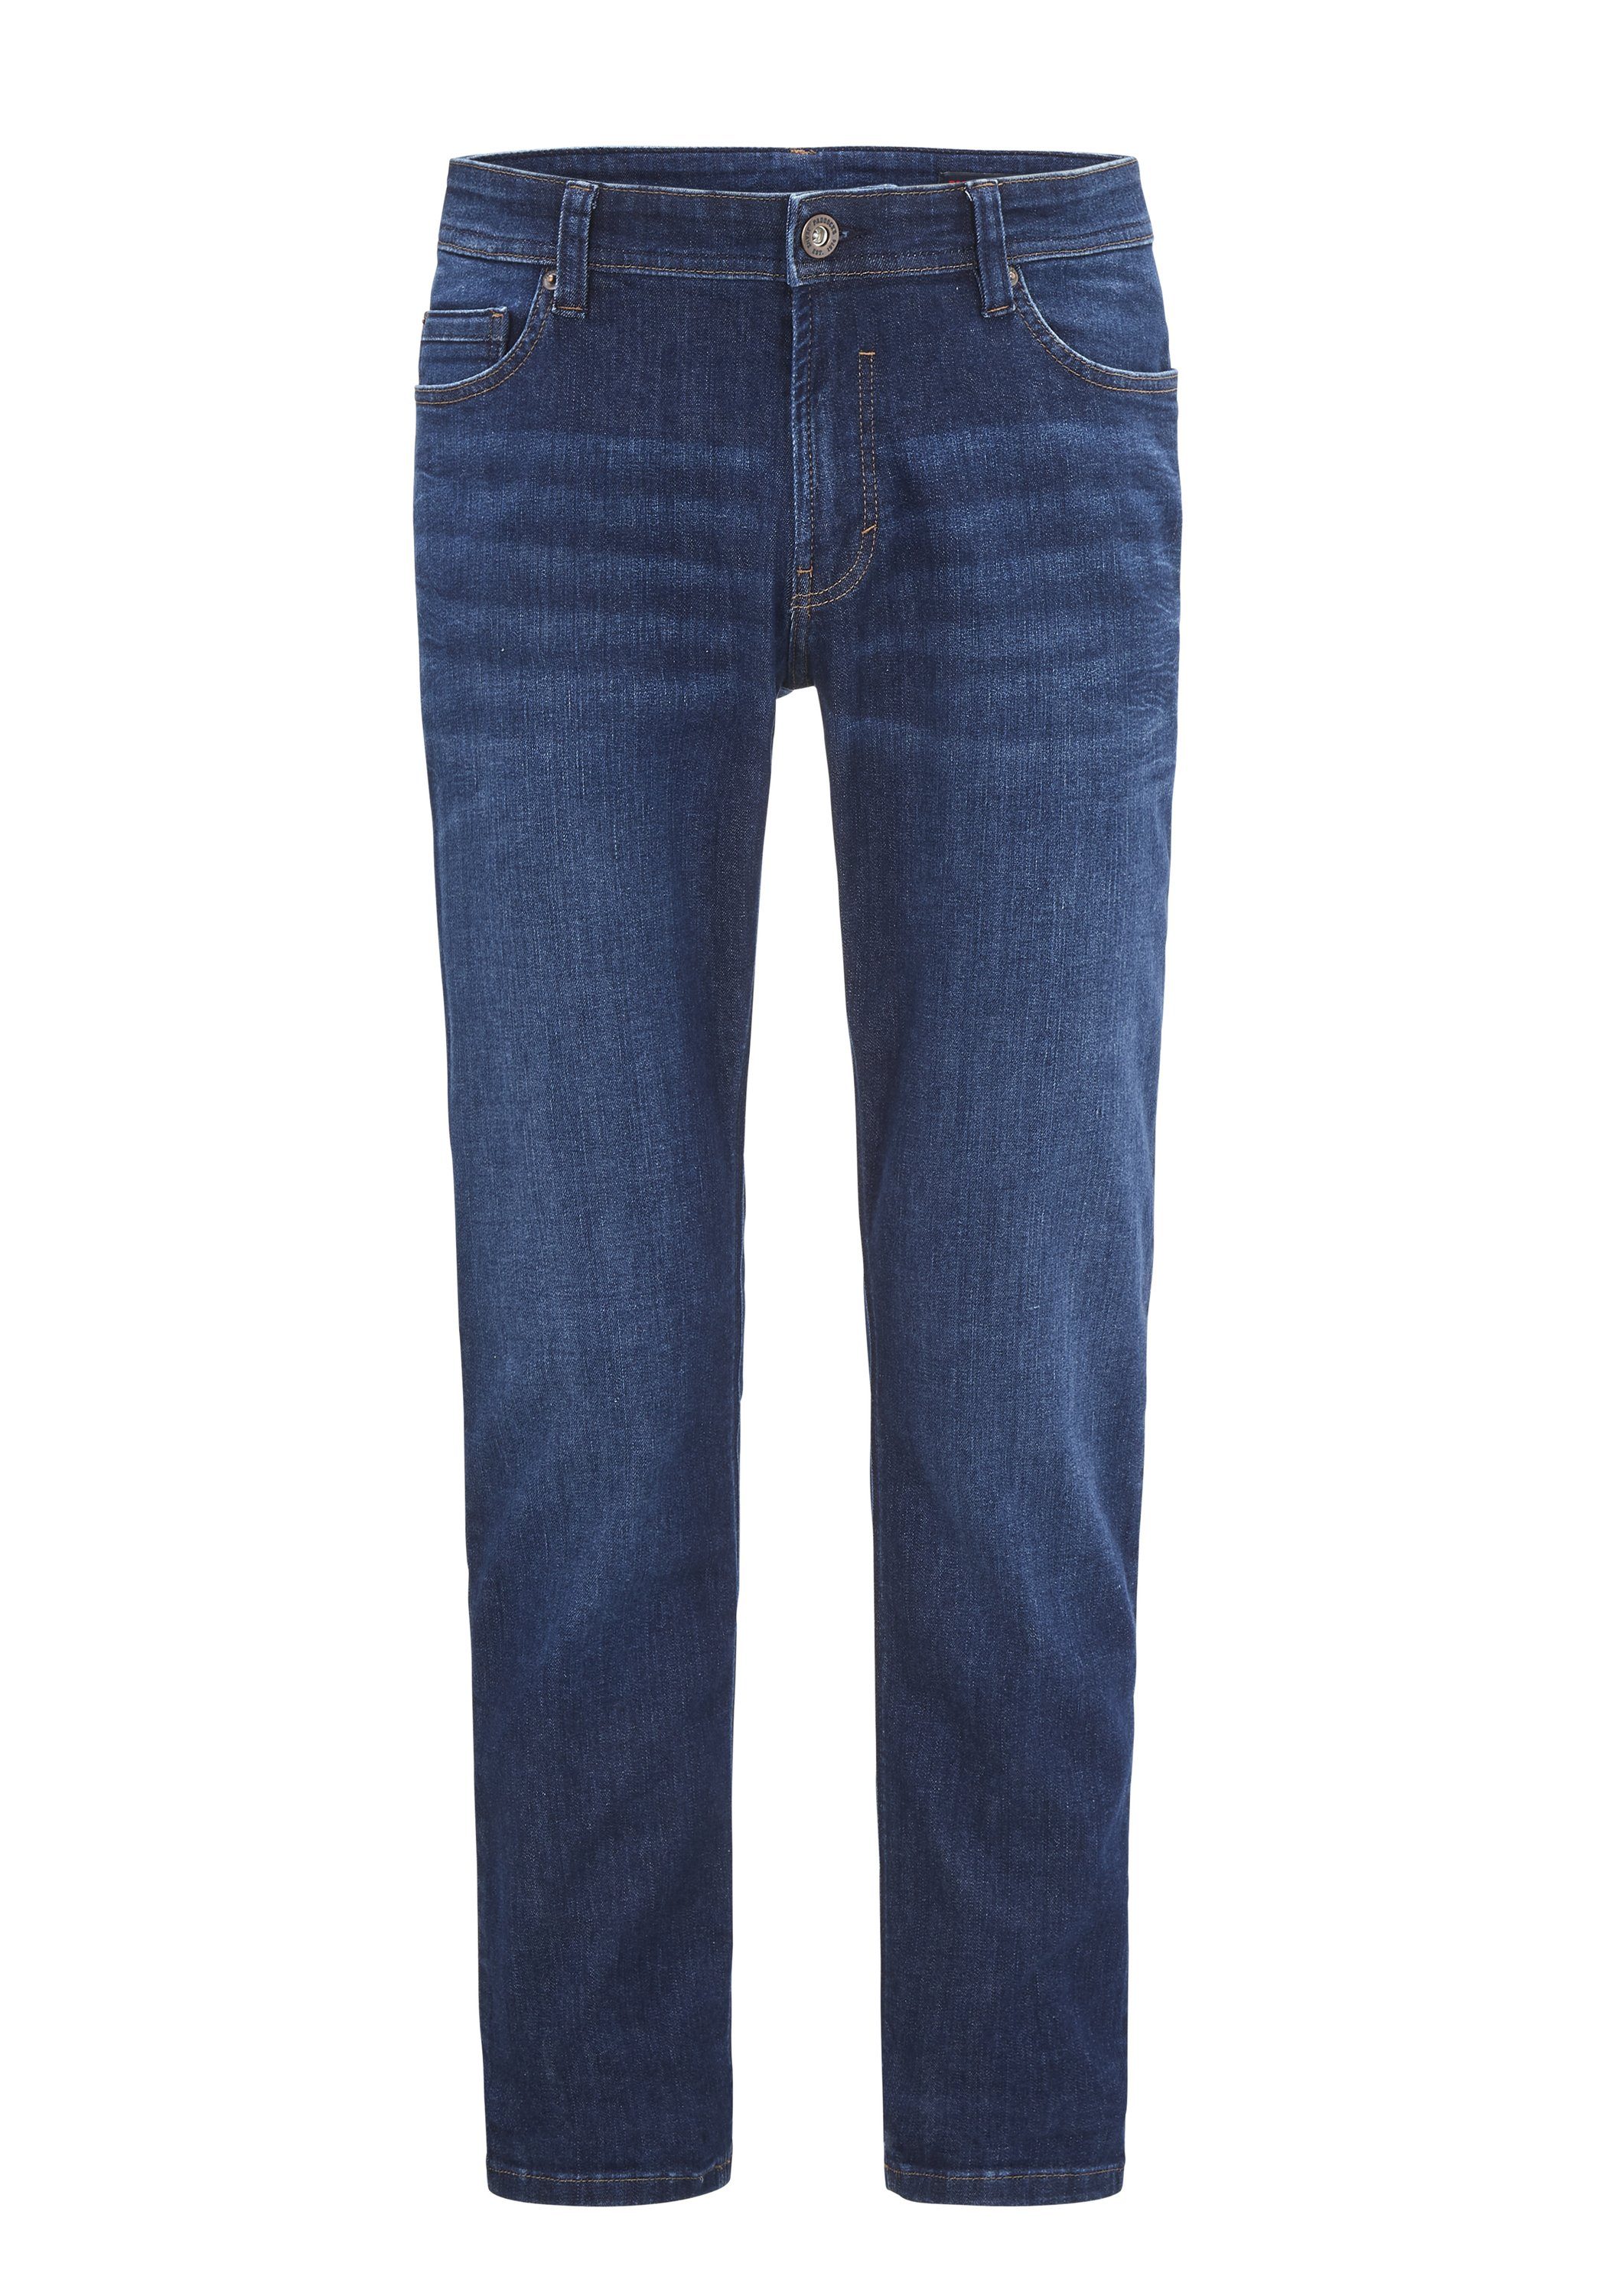 Paddock's Tapered-fit-Jeans RAY Motion blue dark Comfort & Stretch wash vintage